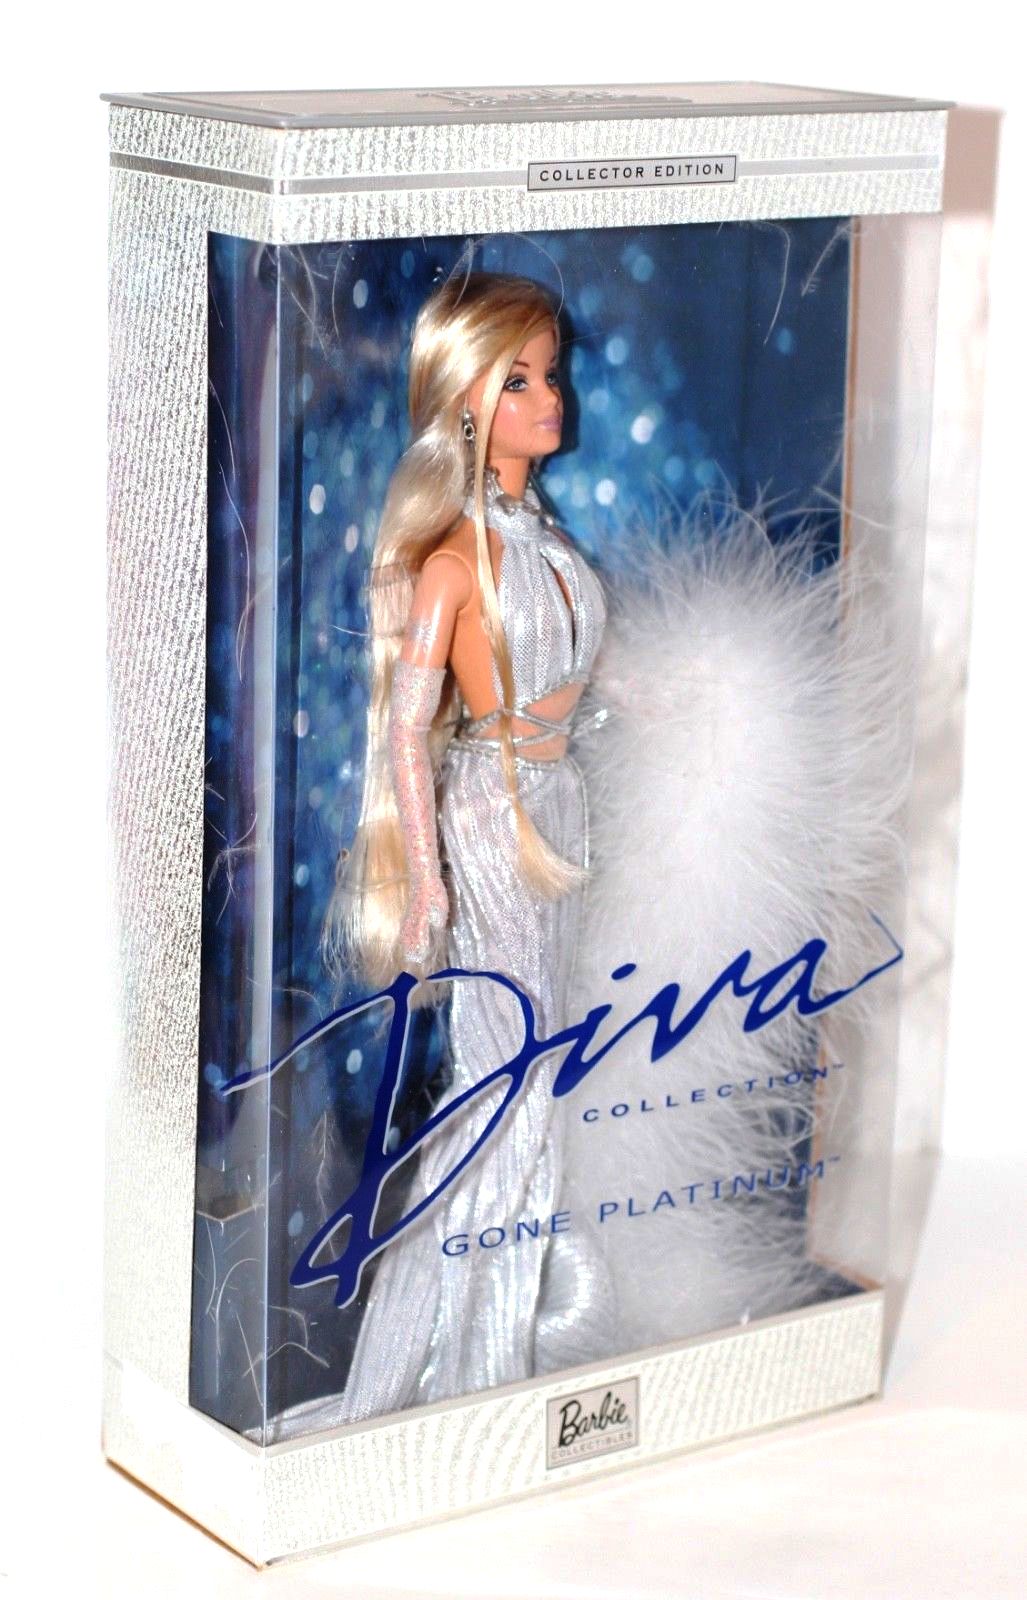 Diva "Gone Platinum" Barbie-#1 (Diva Collection “Blonde” Collector Edition) "Rare-Vintage" Now And Then Collectibles